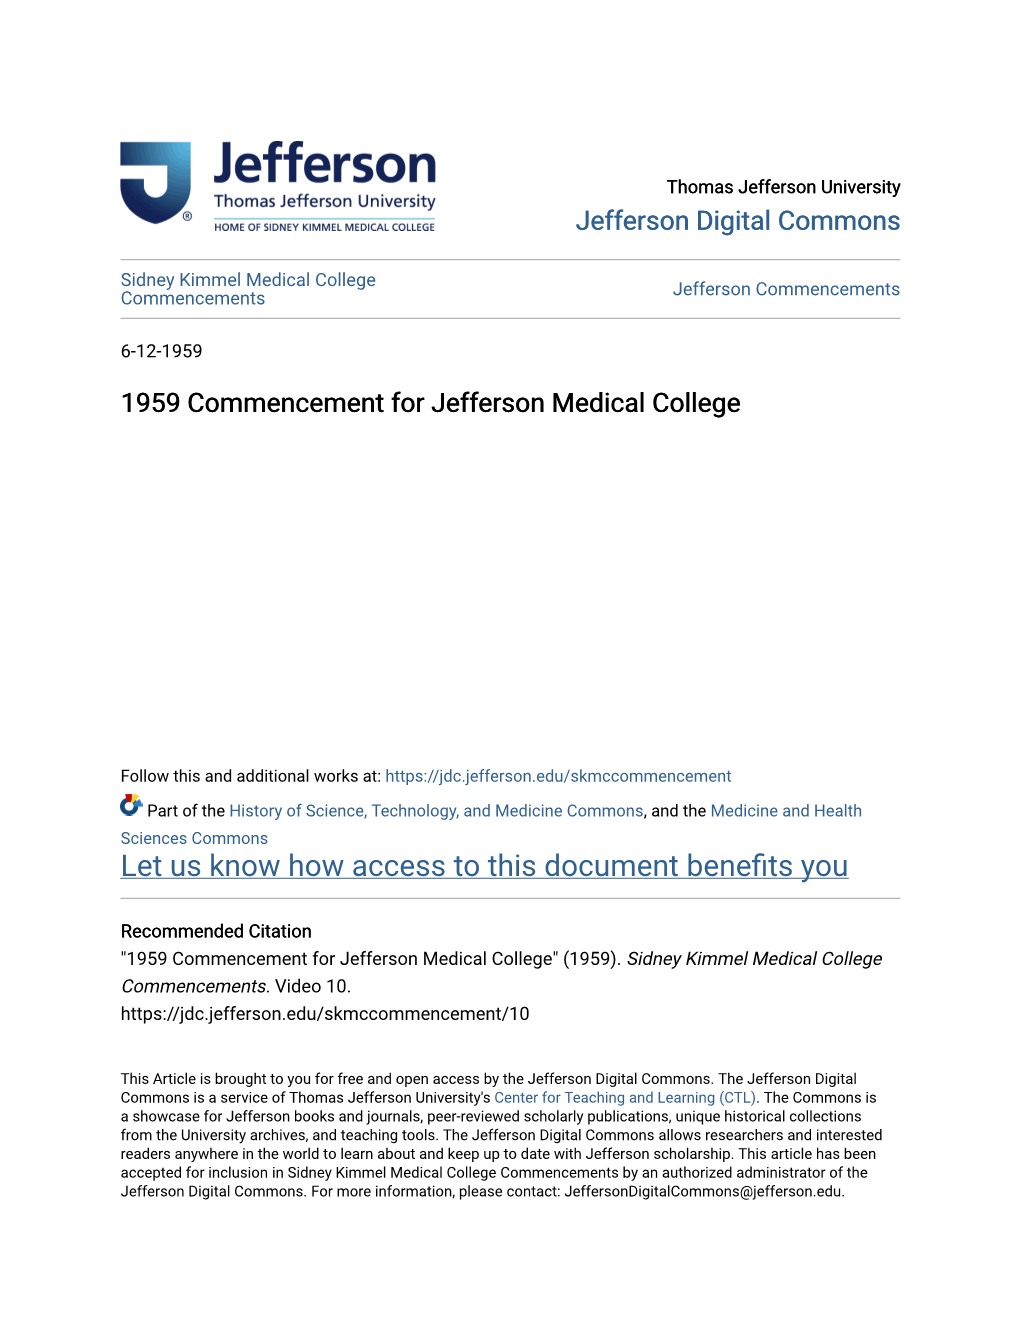 1959 Commencement for Jefferson Medical College